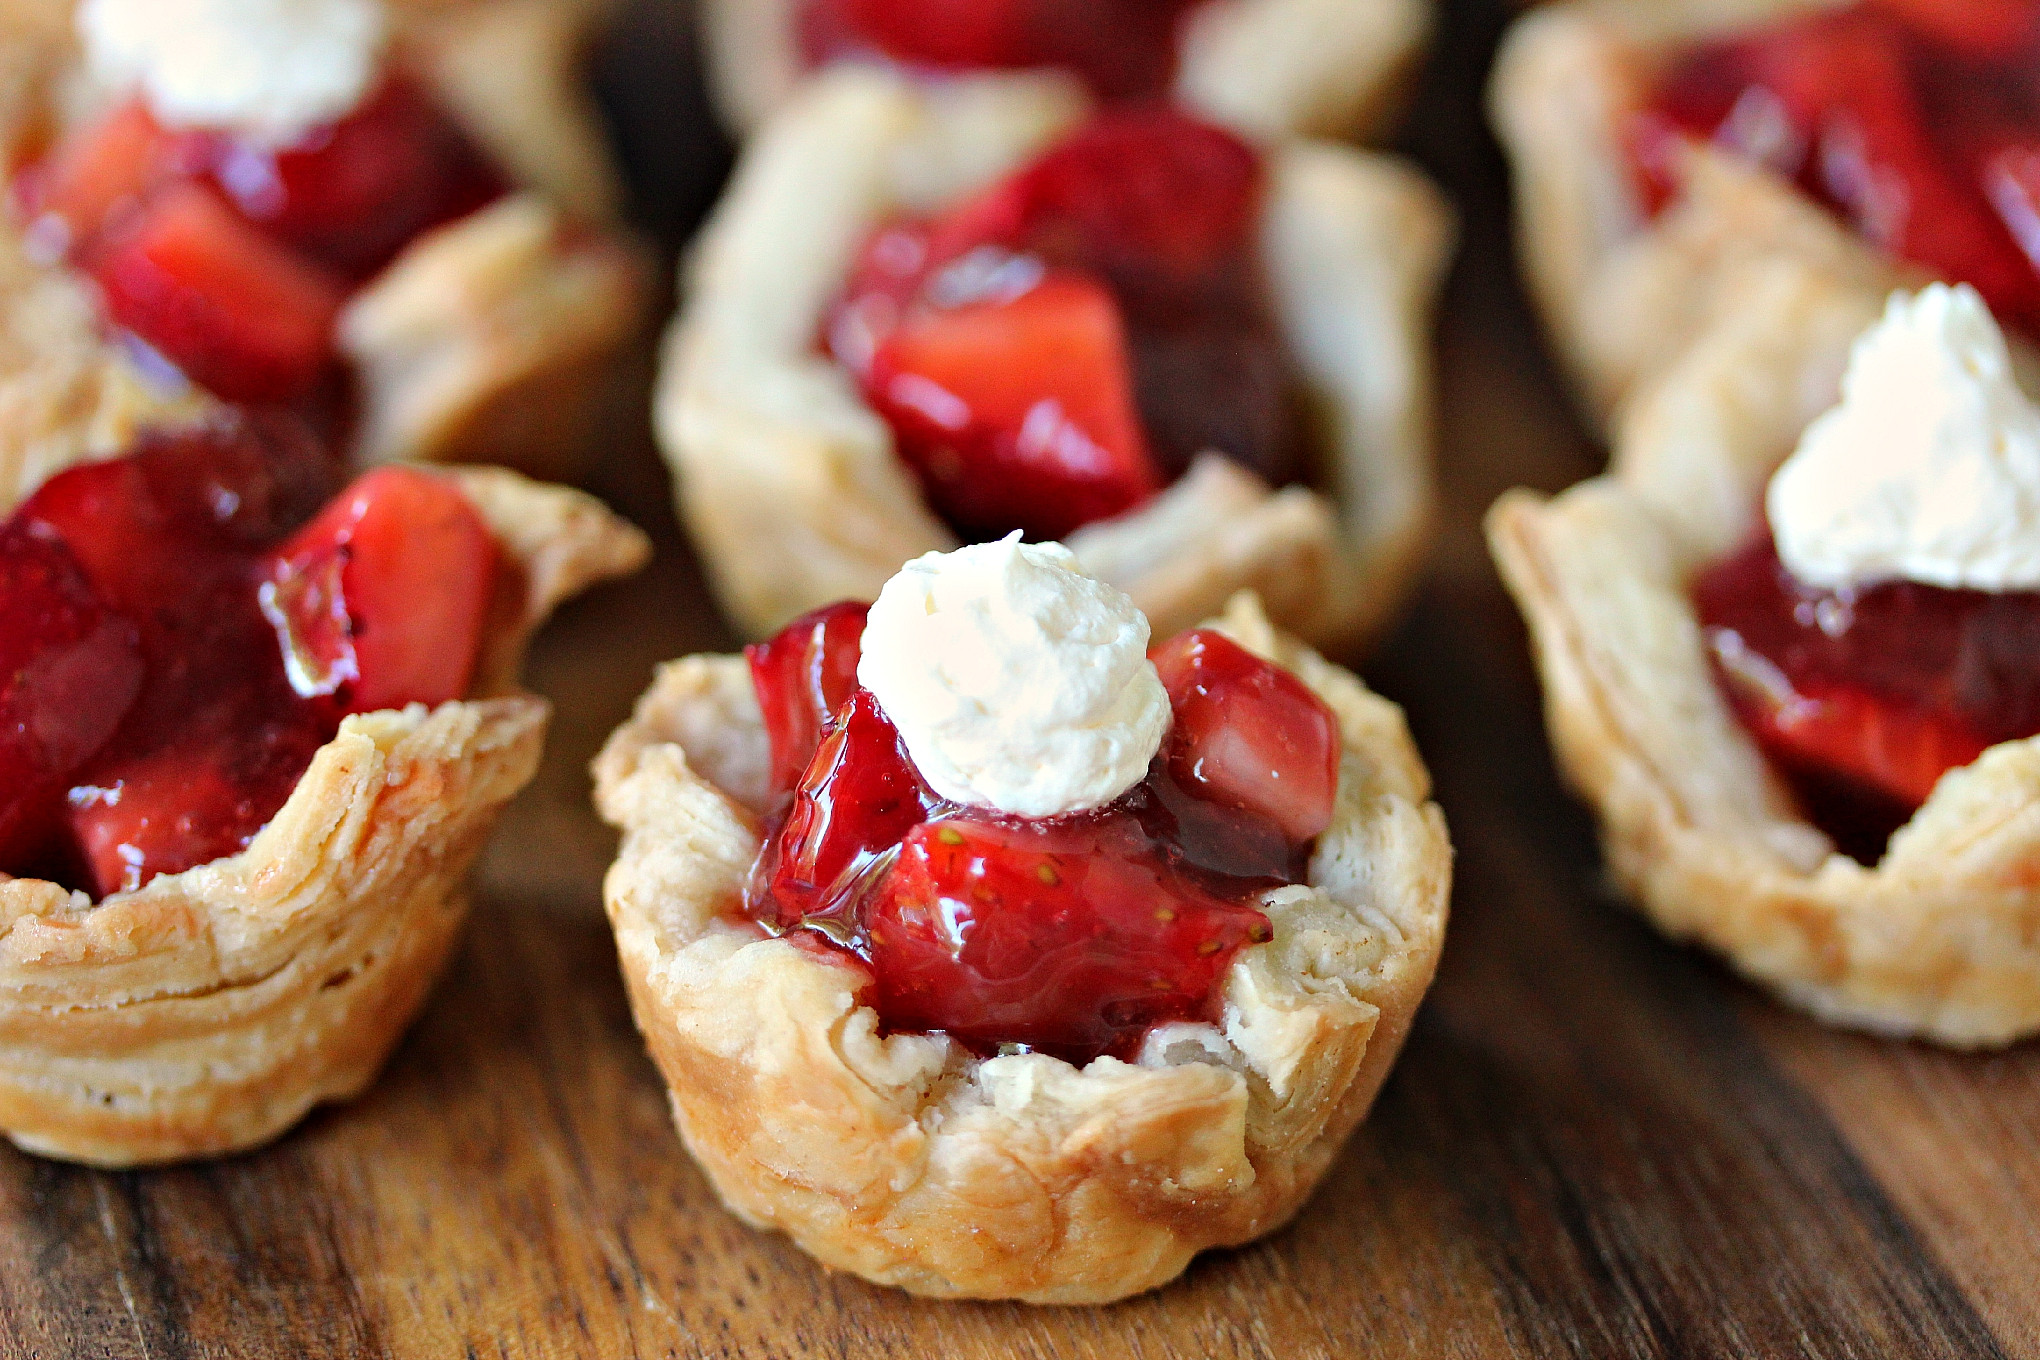 Puffed Pastry Recipes Desserts
 Strawberry Filled Mini Puff Pastries